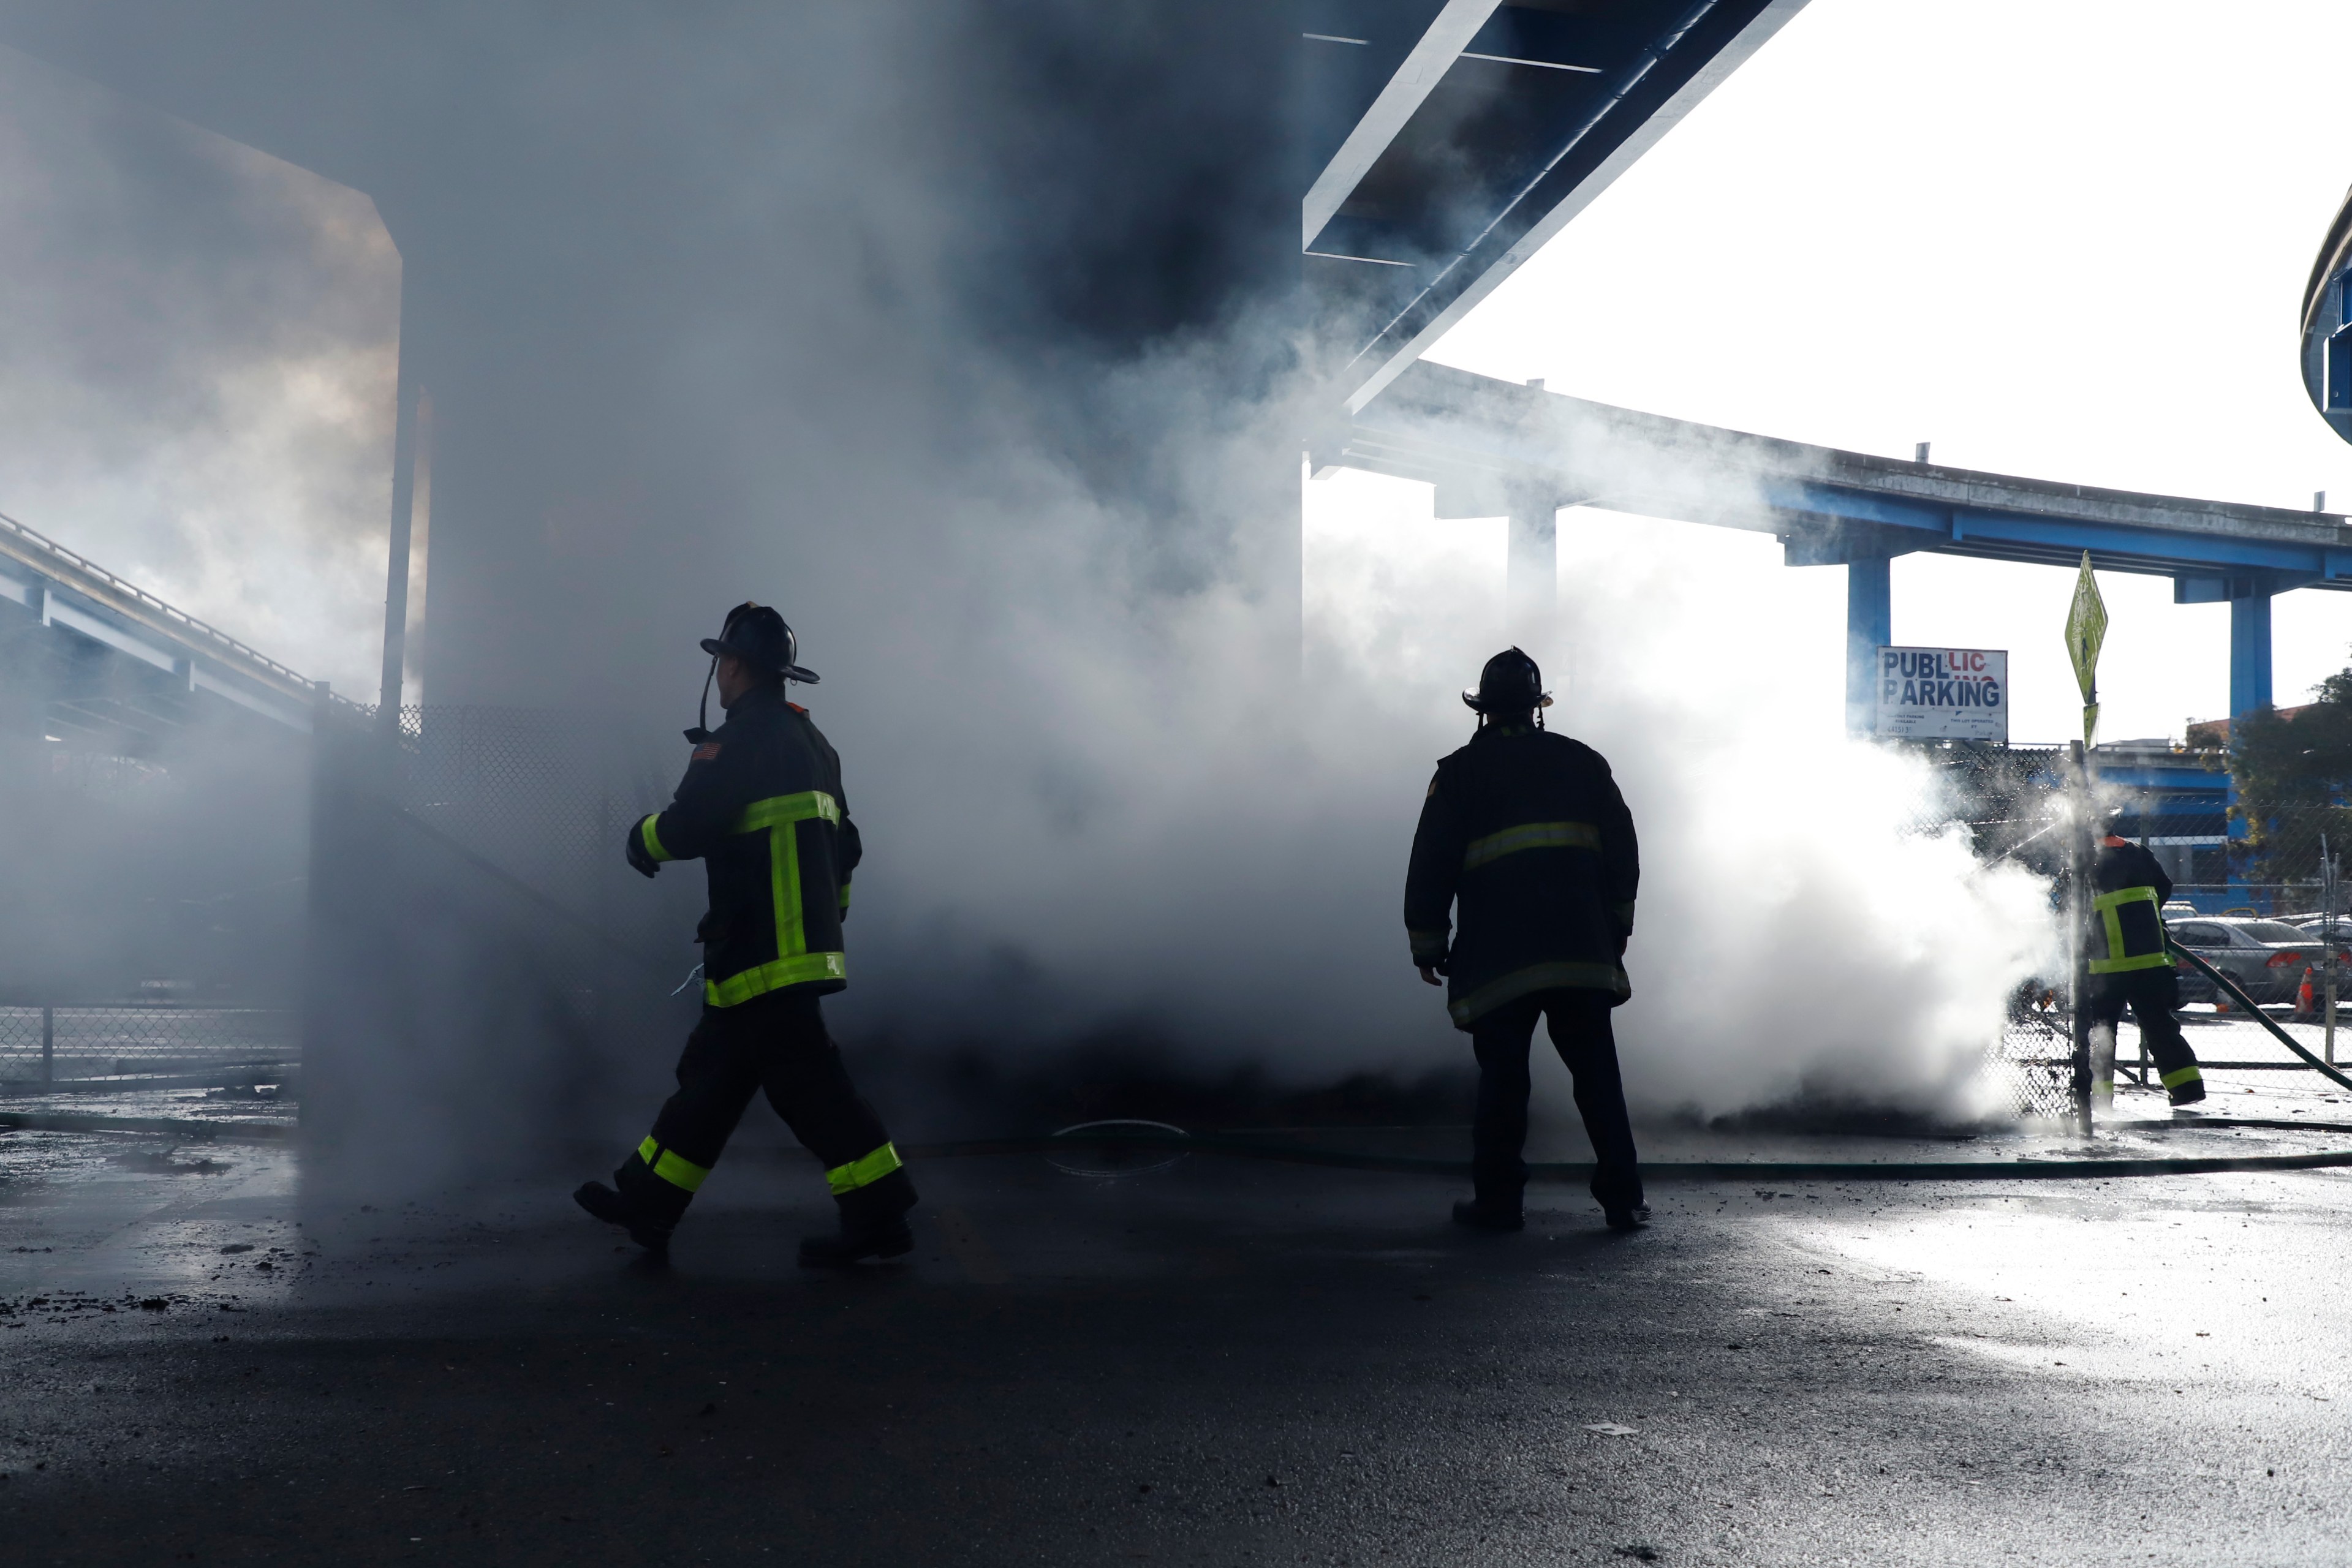 Firefighters walk through thick smoke, with hoses, near a "Public Parking" sign, under an overpass.